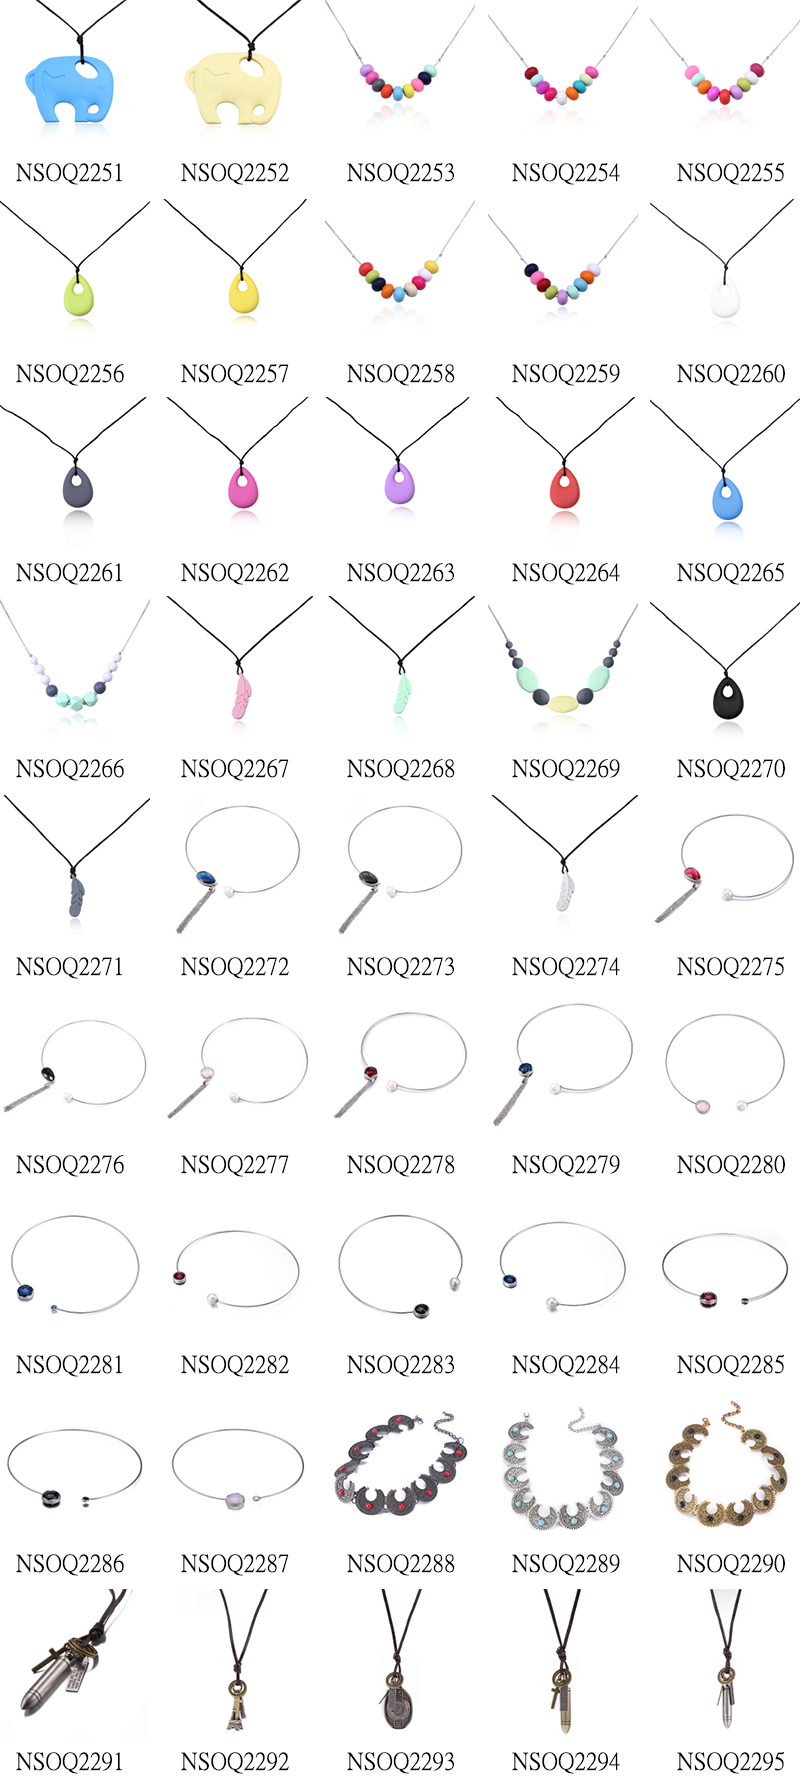 600+ Classic Necklace Design Ideas You Should Have a Look - SOQ